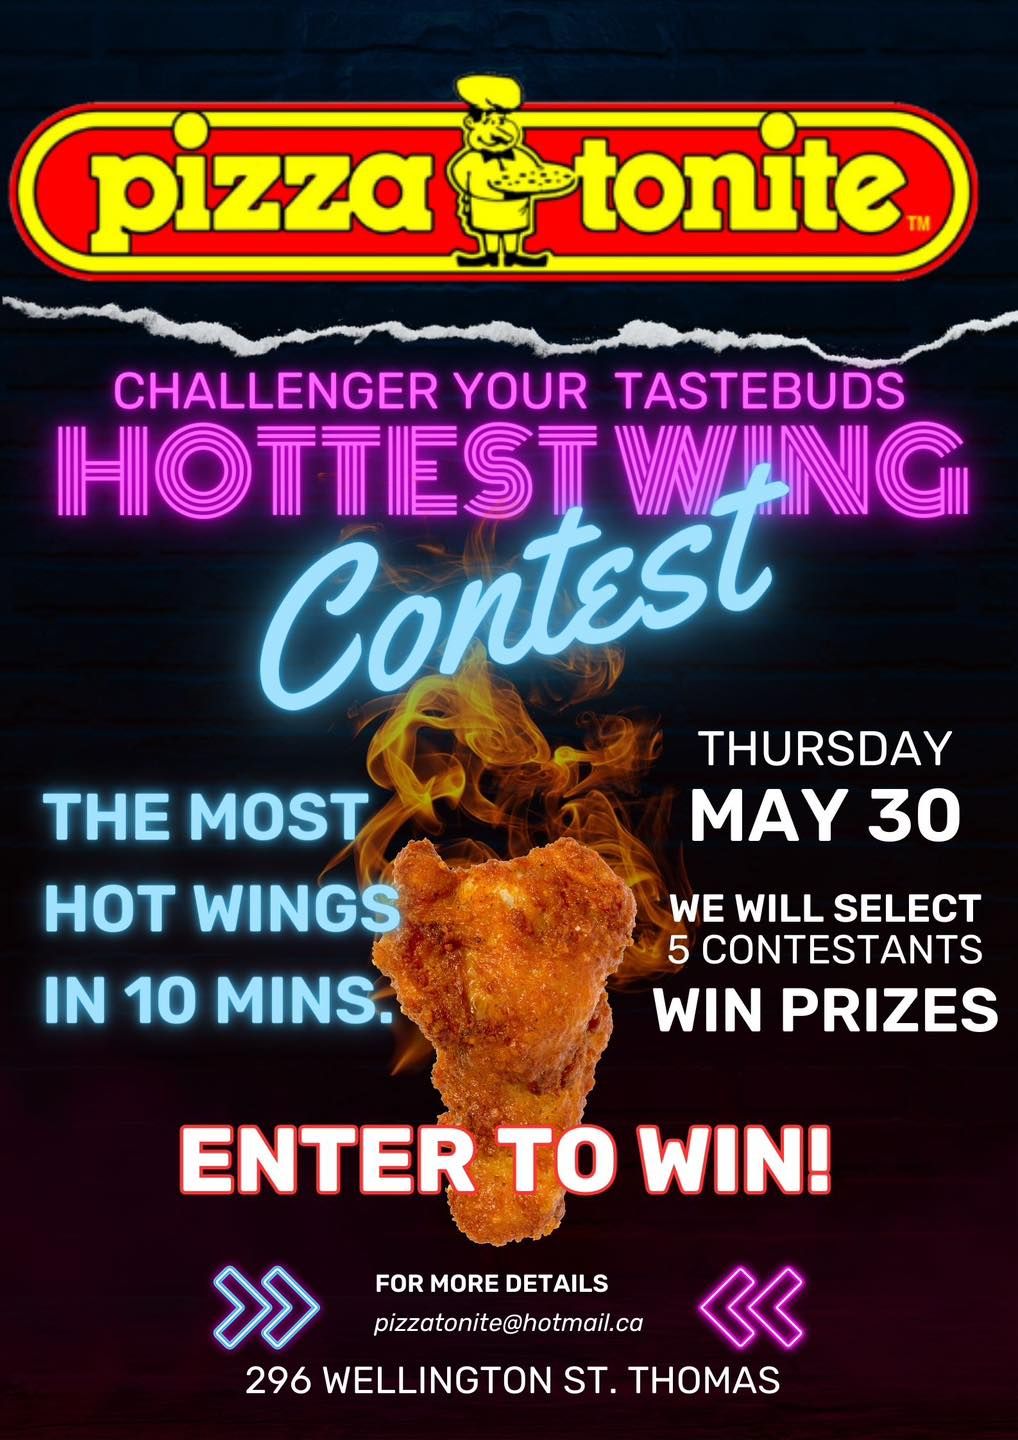 HOT WING CONTEST